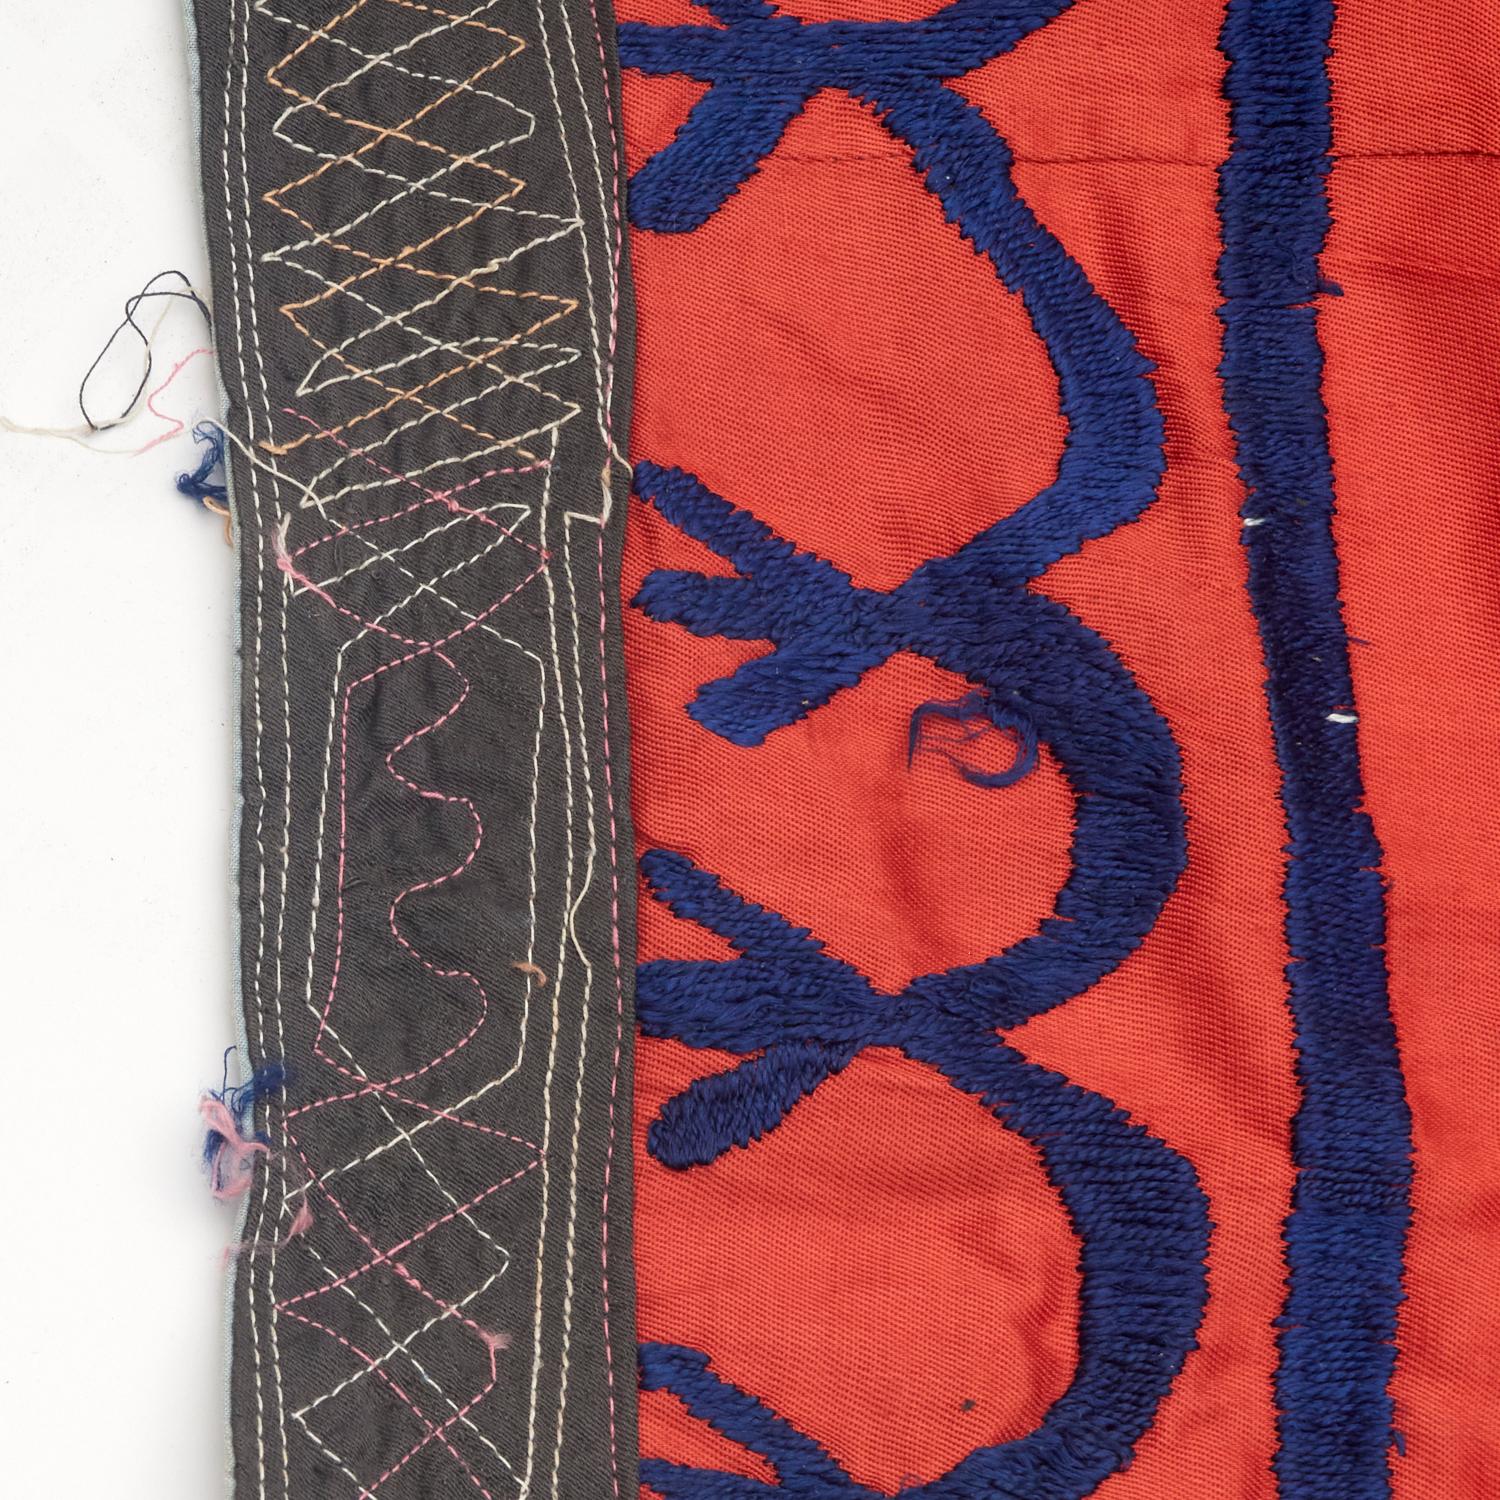 Uzbek Two Vintage Embroidered Suzani Style Textiles from Central Asia - Ex Lewis Stein For Sale